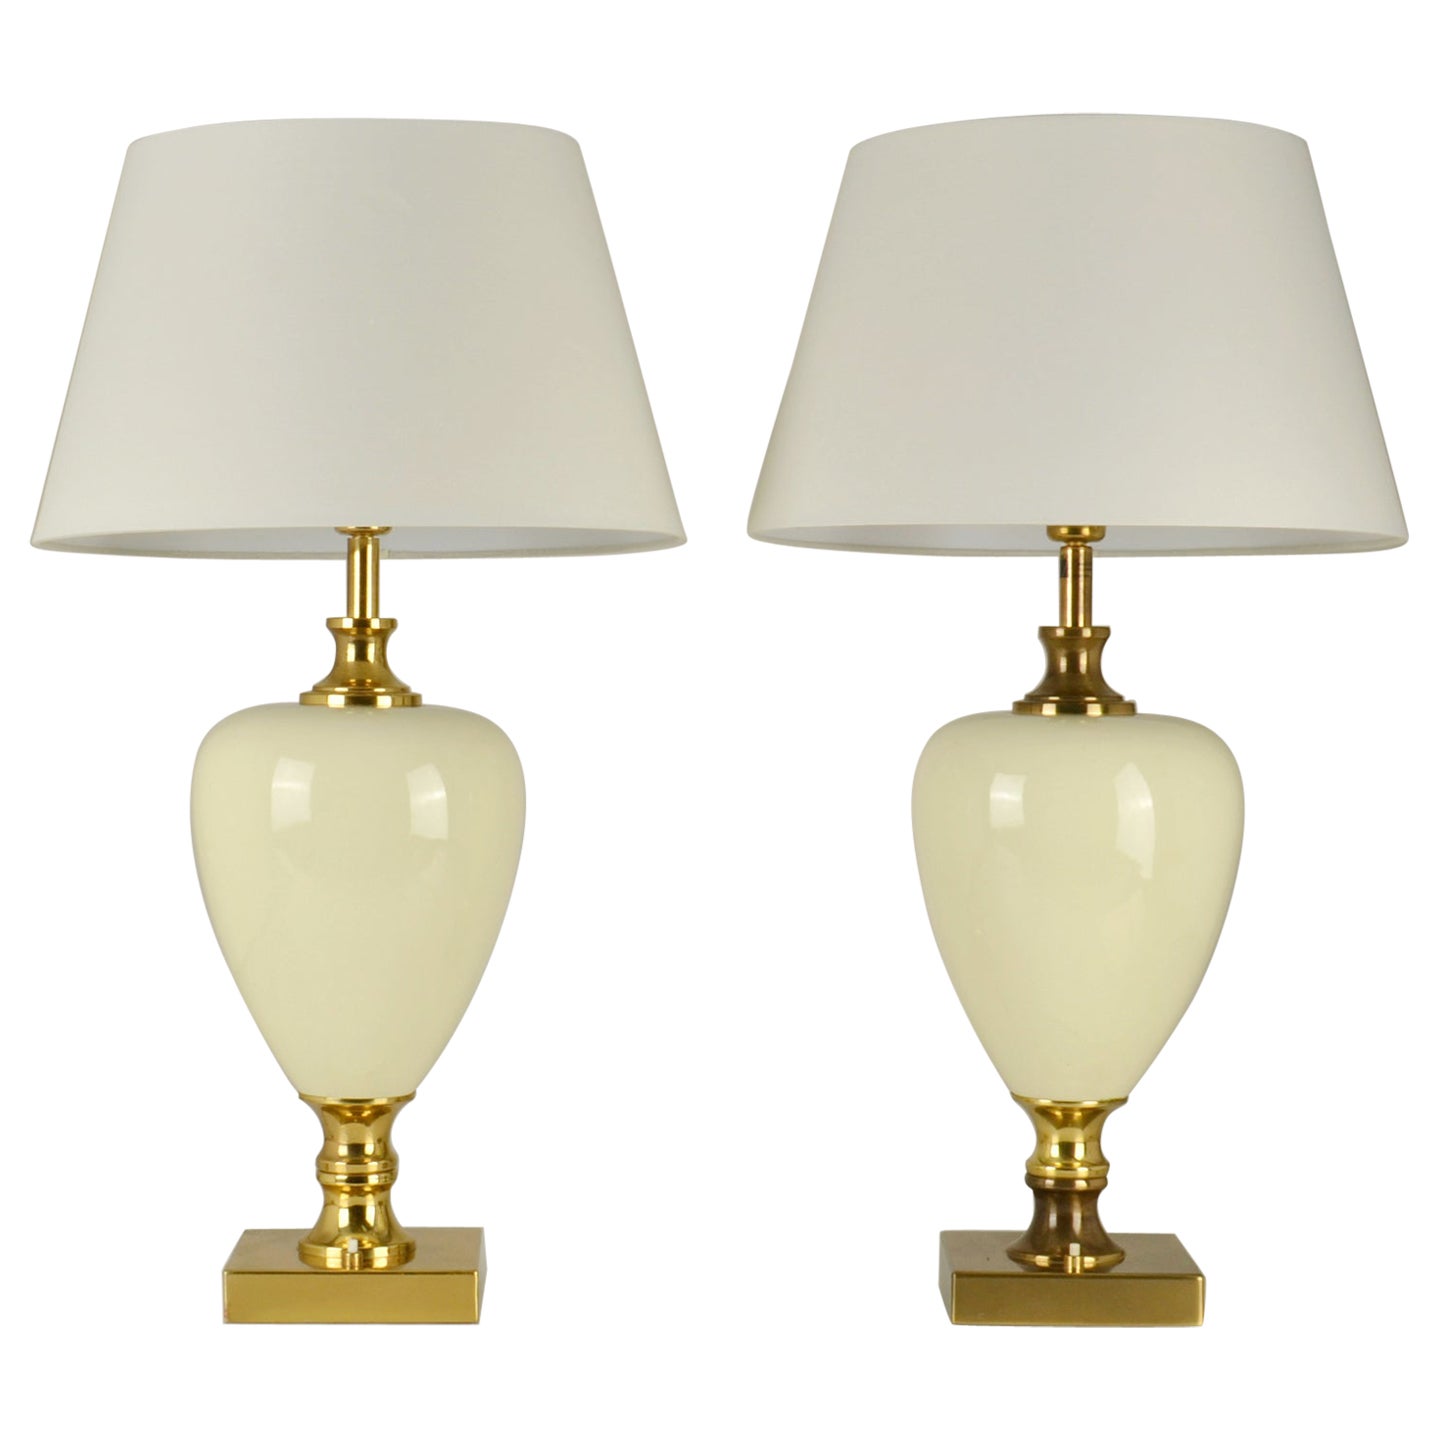 Pair of Cream Porcelain and Brass Table Lamps by Zonca, Italy, 1970s For Sale